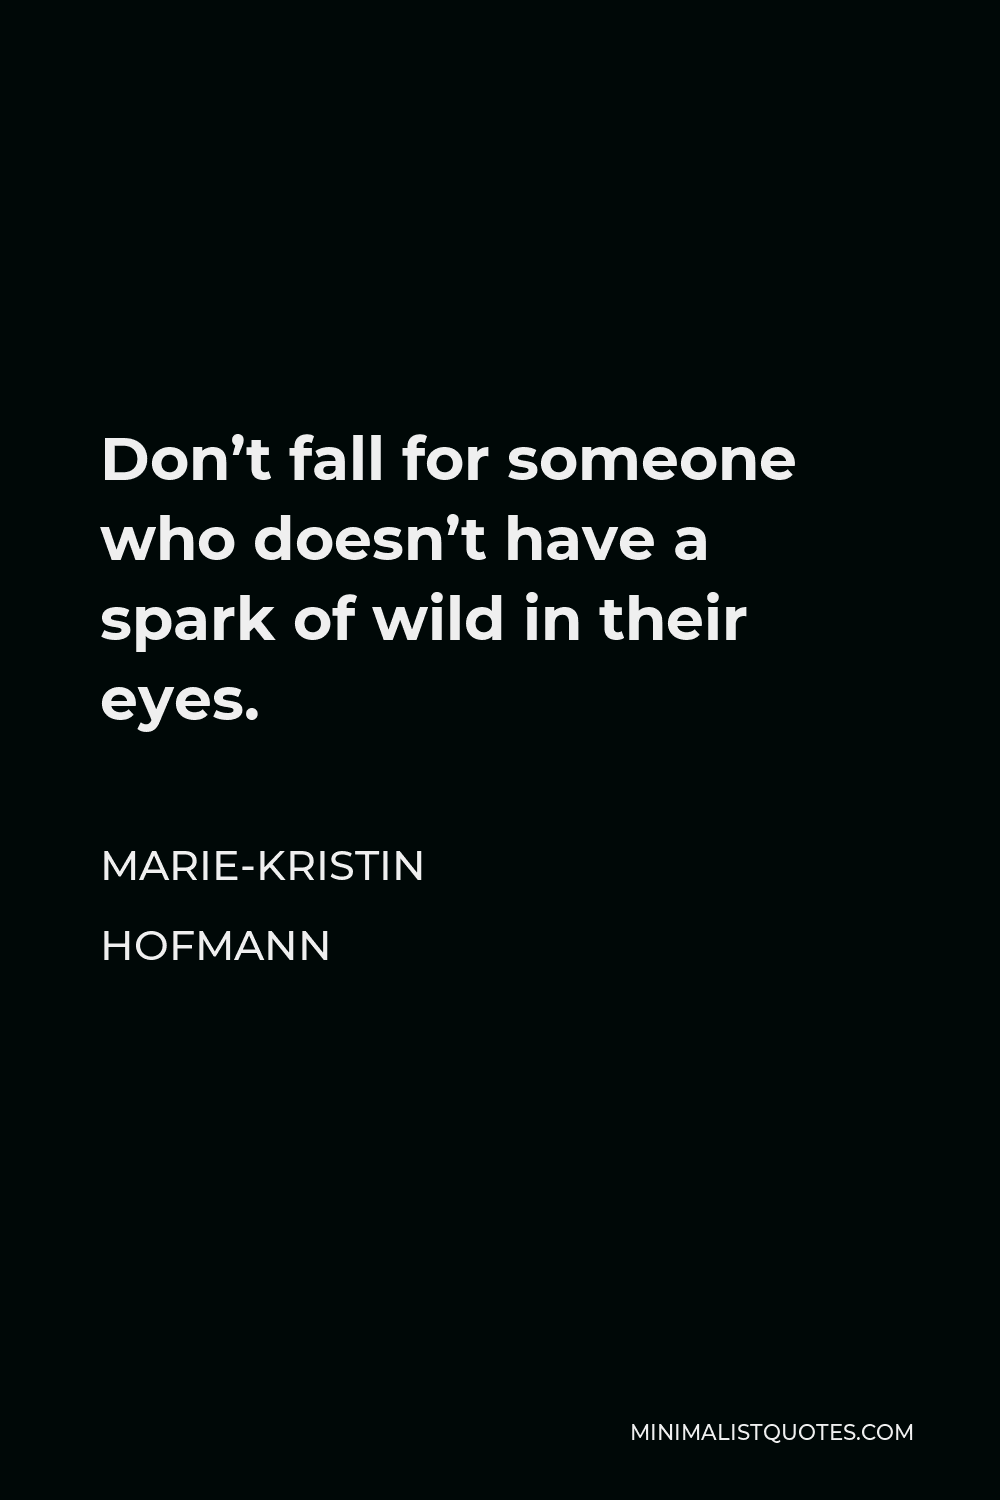 Marie-Kristin Hofmann Quote - Don’t fall for someone who doesn’t have a spark of wild in their eyes.